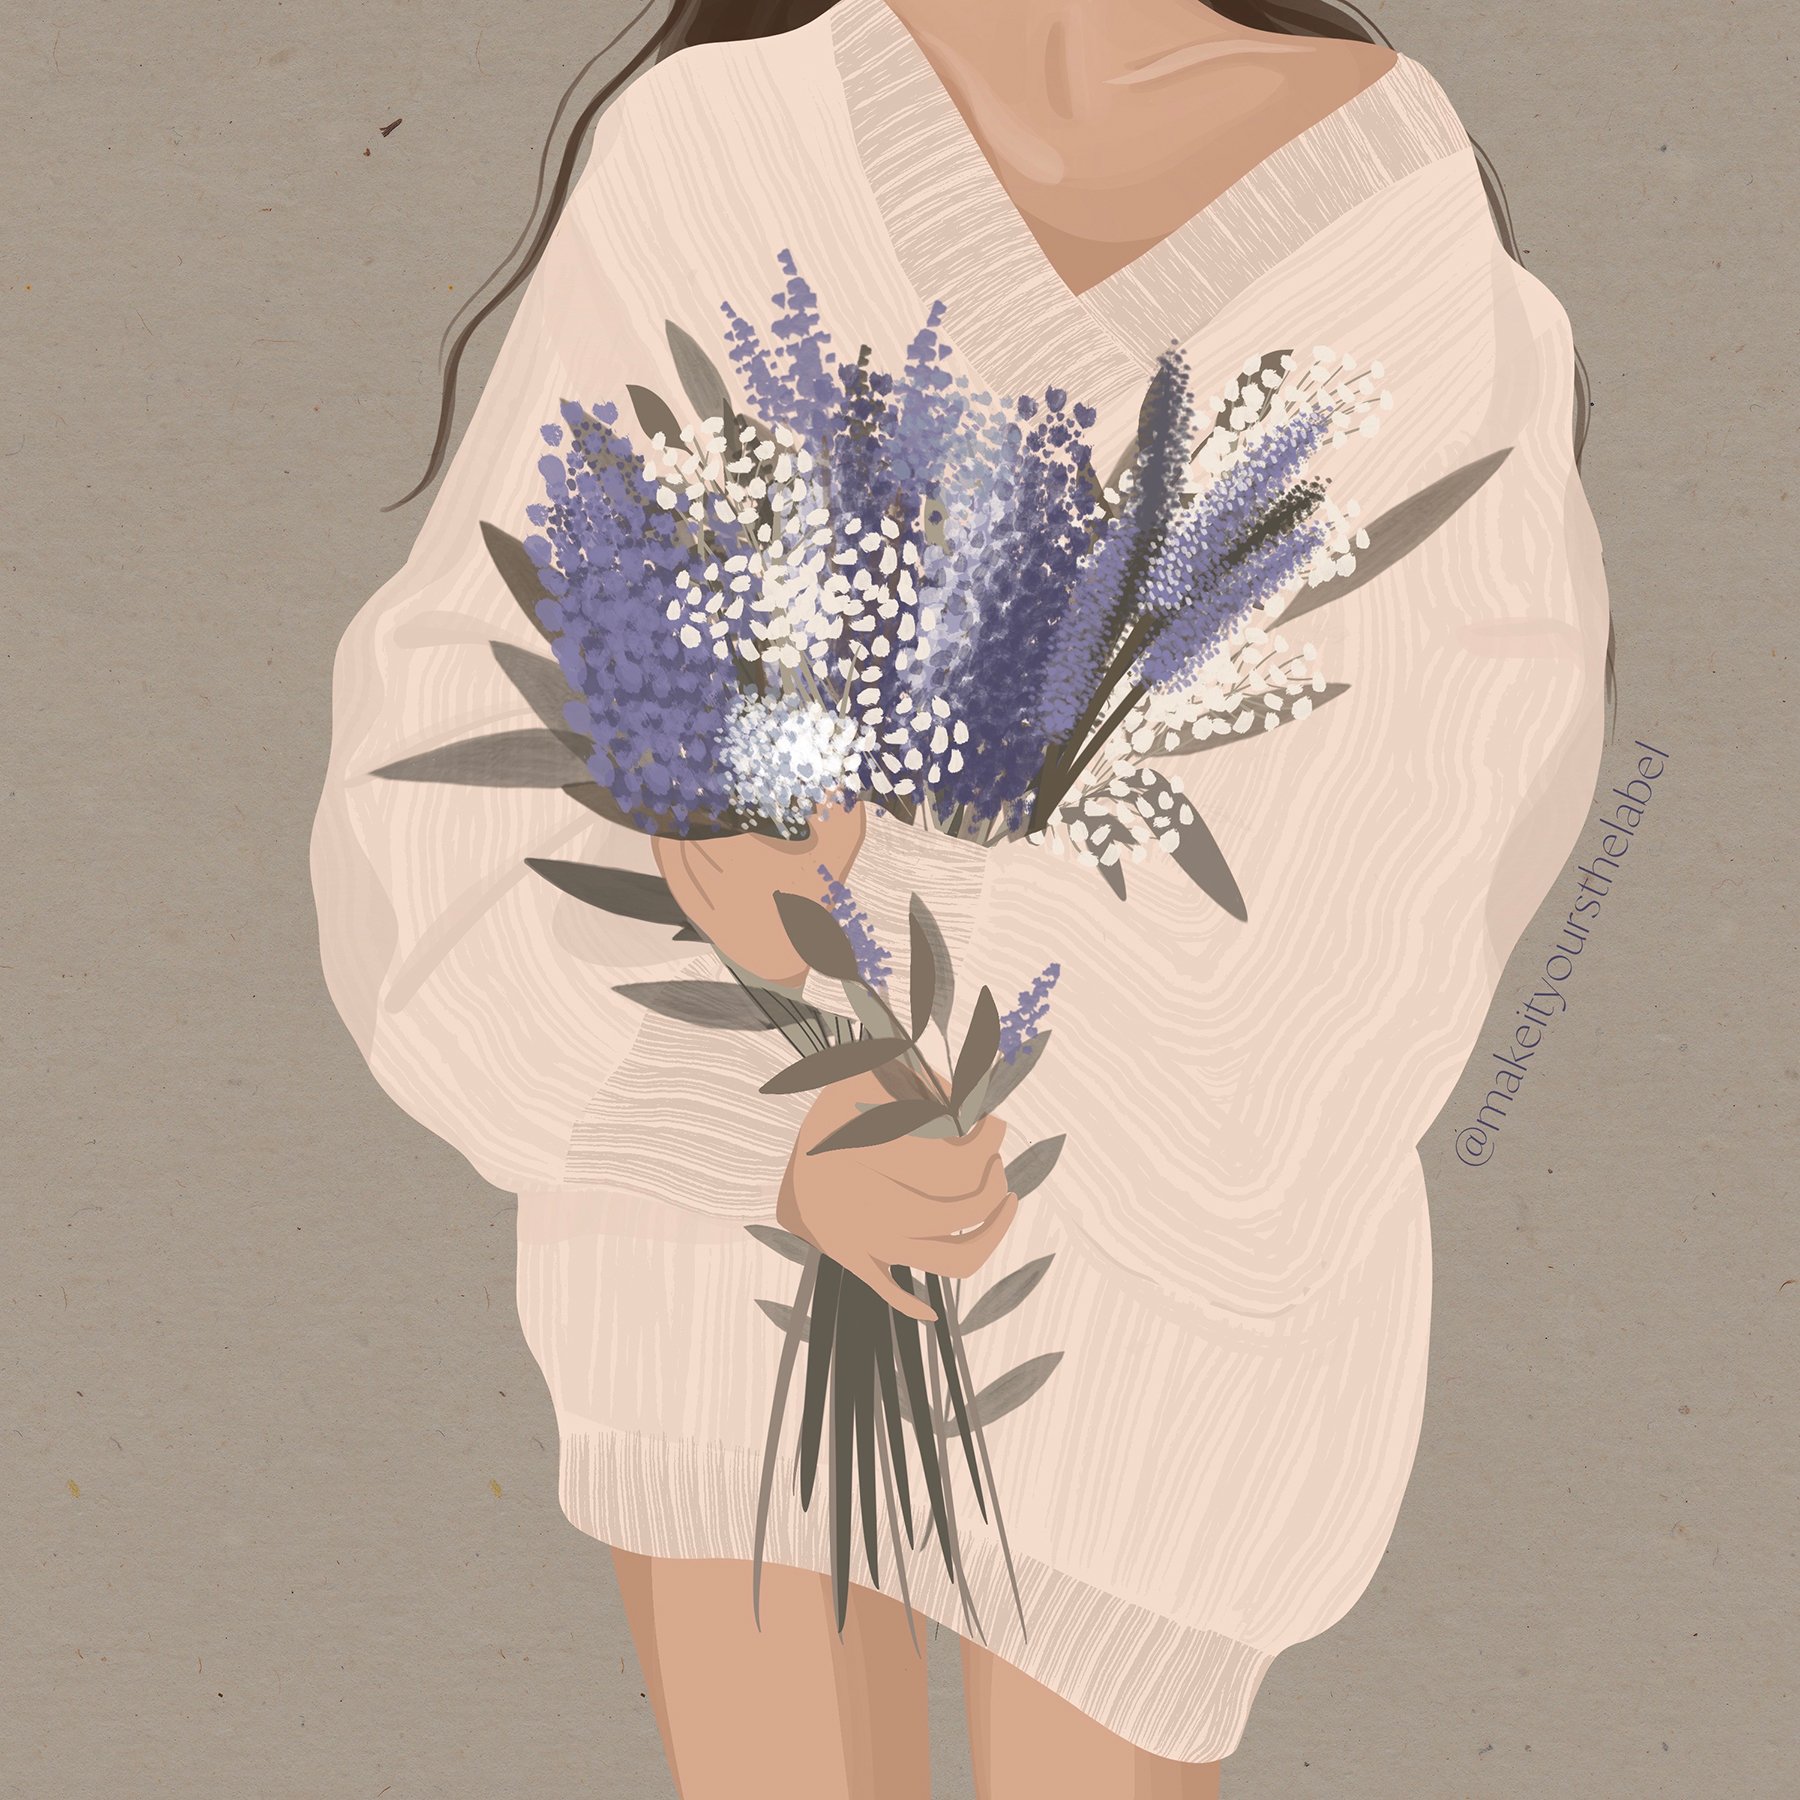 Women-holding-flowers_Illustration-by-make-it-yours---the-label